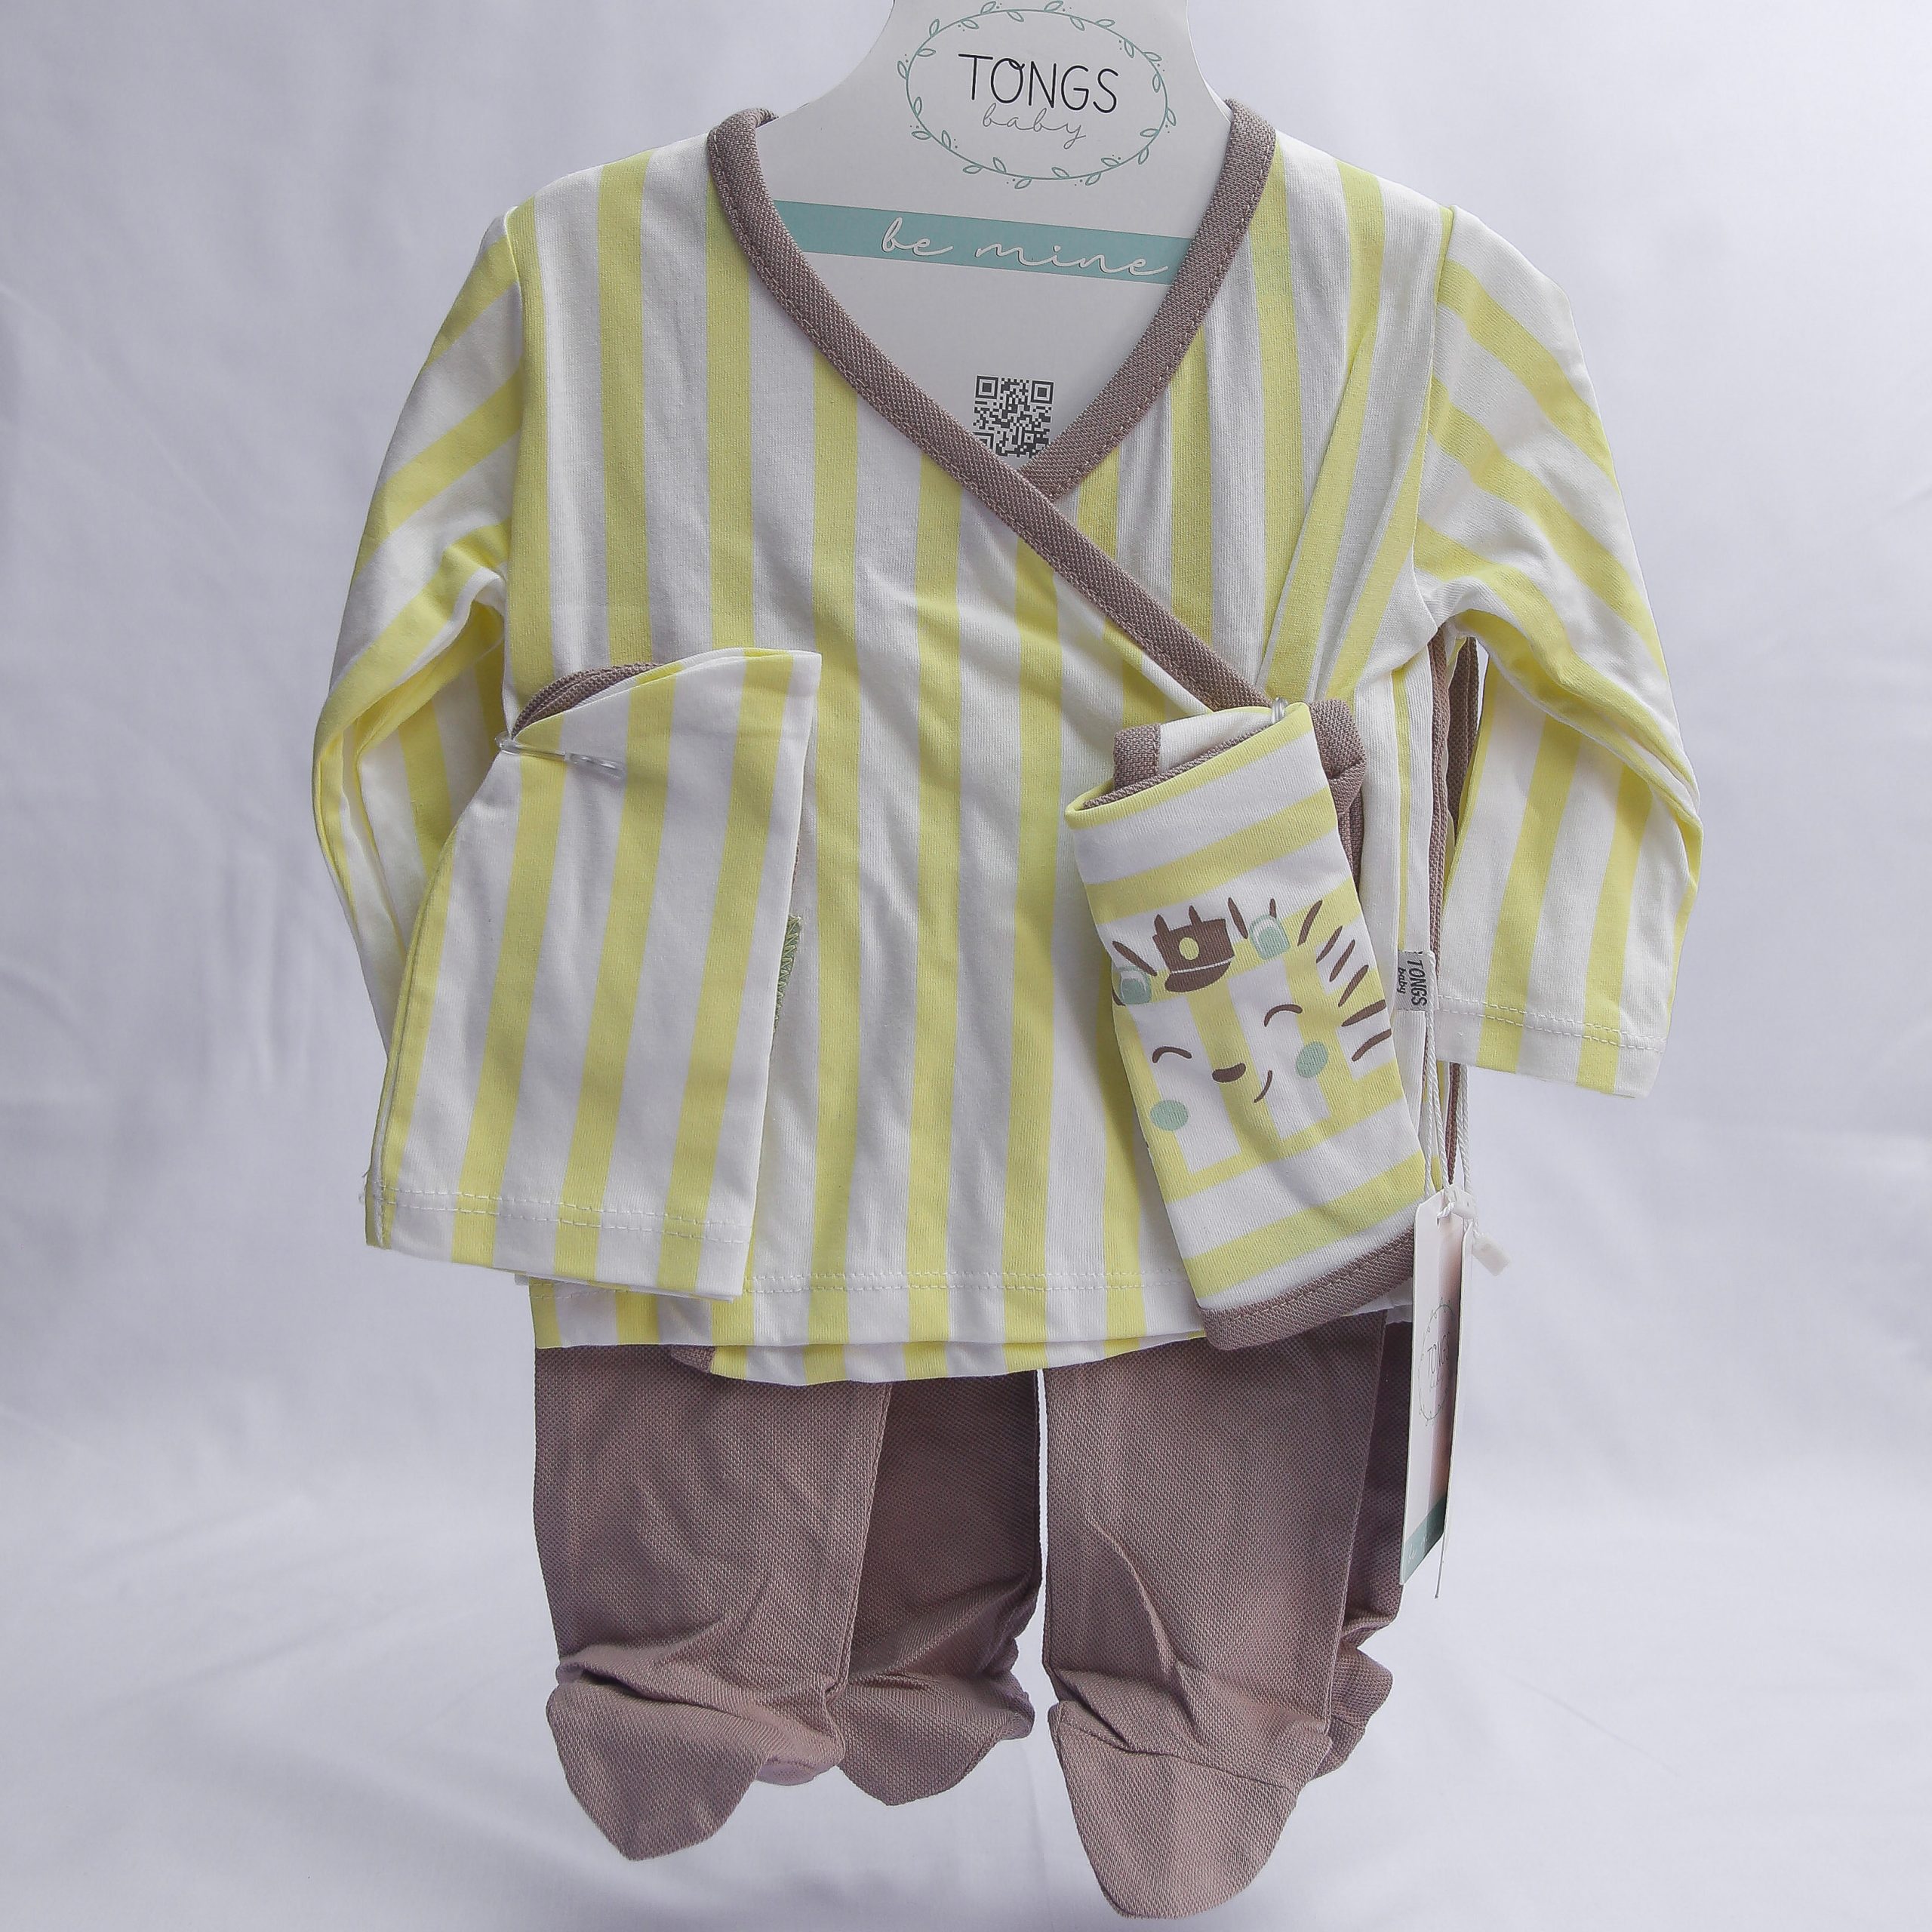 Tongs Newborn Outfit (5 piece)